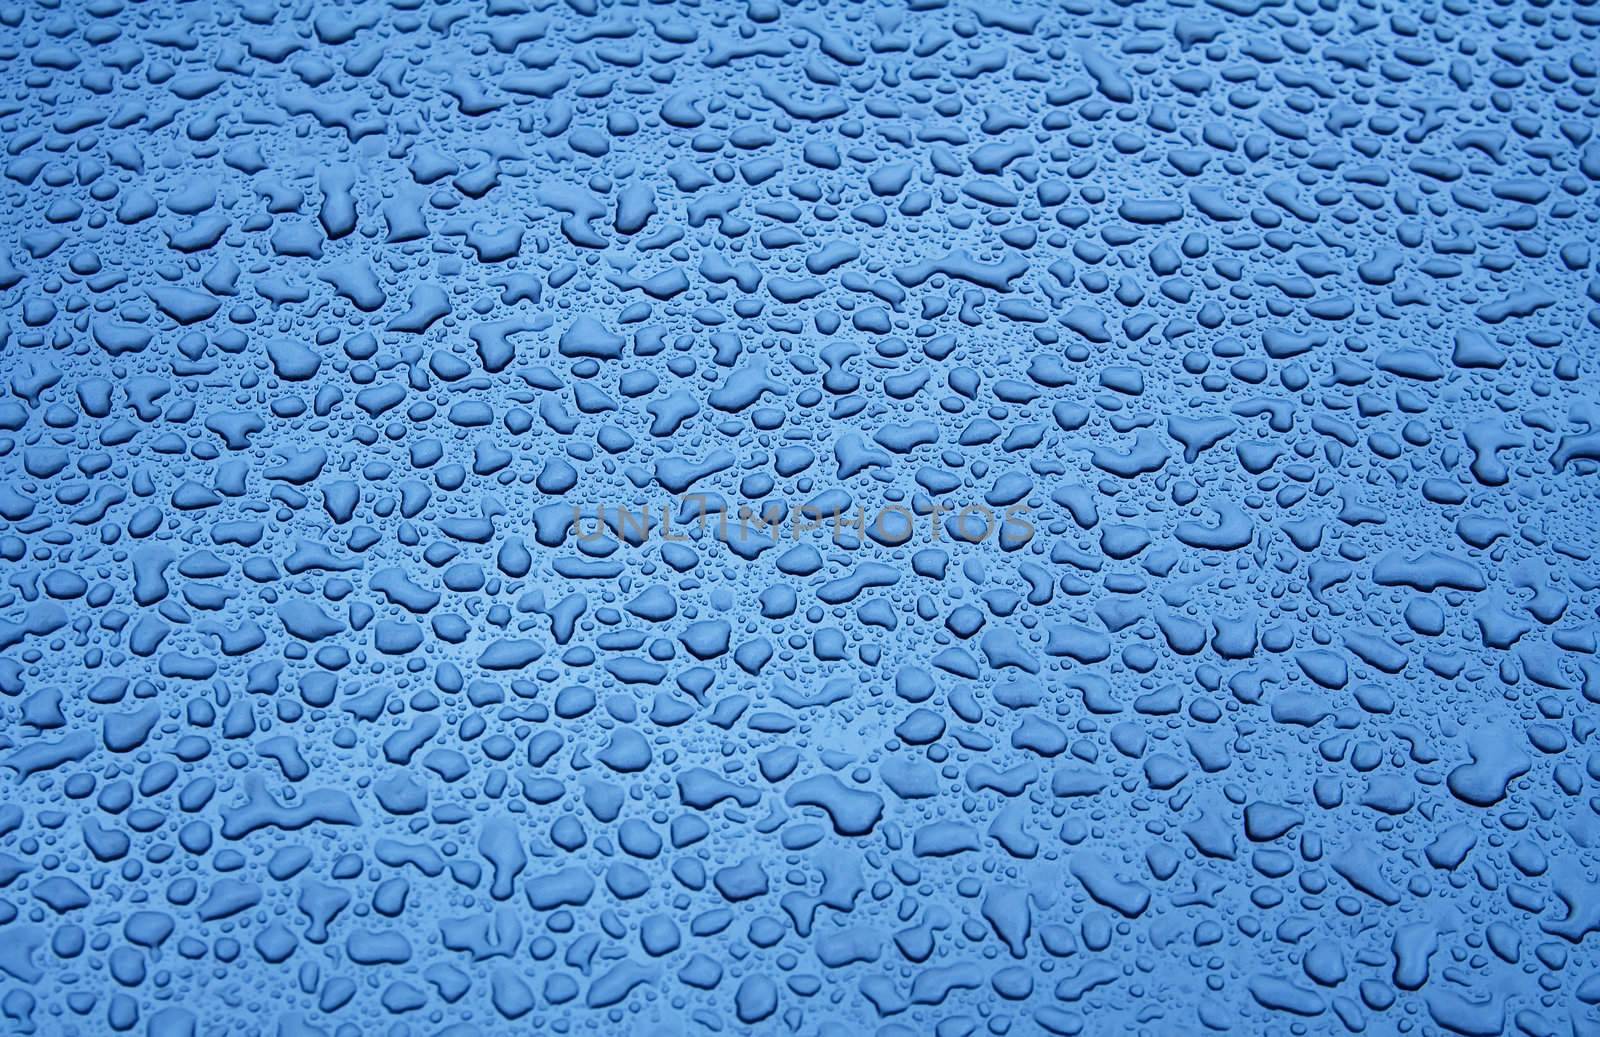 Water Droplets on a Steel Surface by Sergius